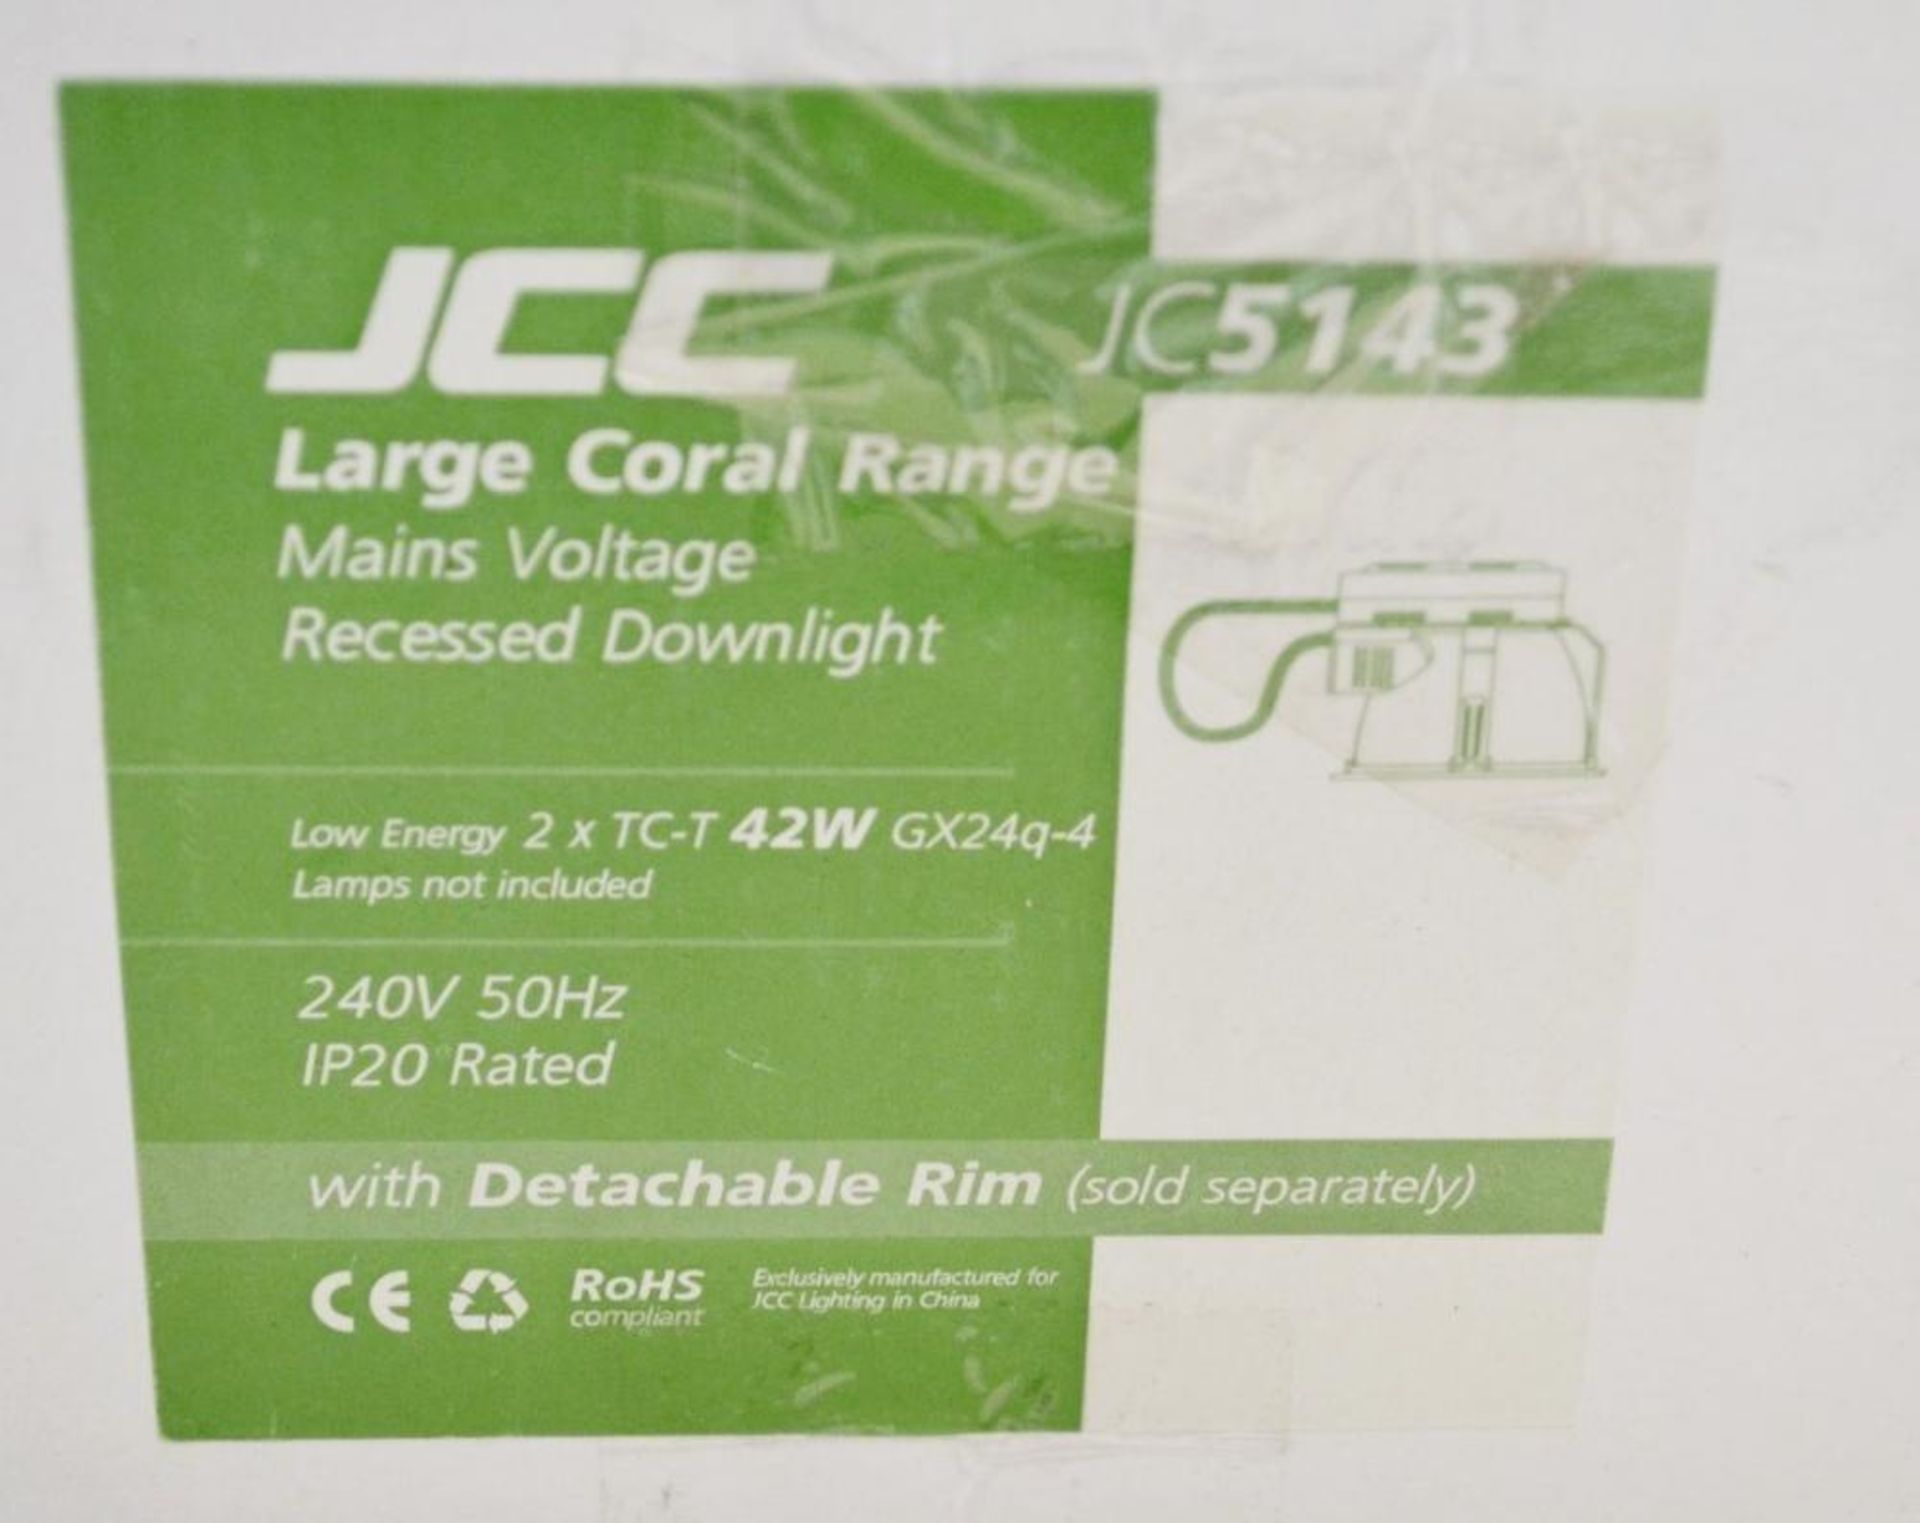 5 x JCC Lighting JC5143 Large Coral Range Commercial Recessed Downlight - Colour: Silver - Low - Image 2 of 8